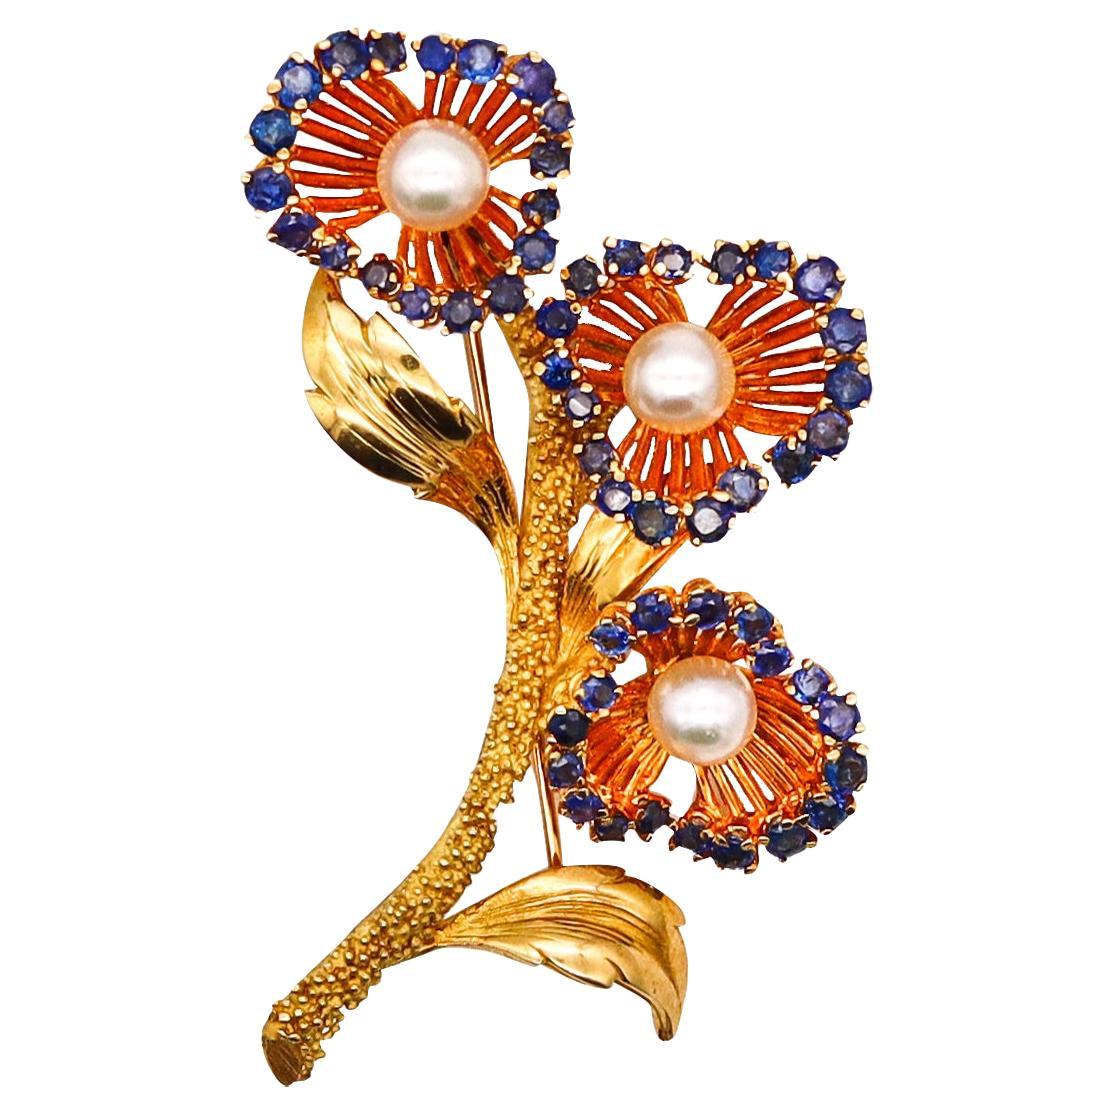 Tiffany Co. 1960 Retro Pin Brooch in 18kt Gold with 3.35 Ct Sapphires and Pearls